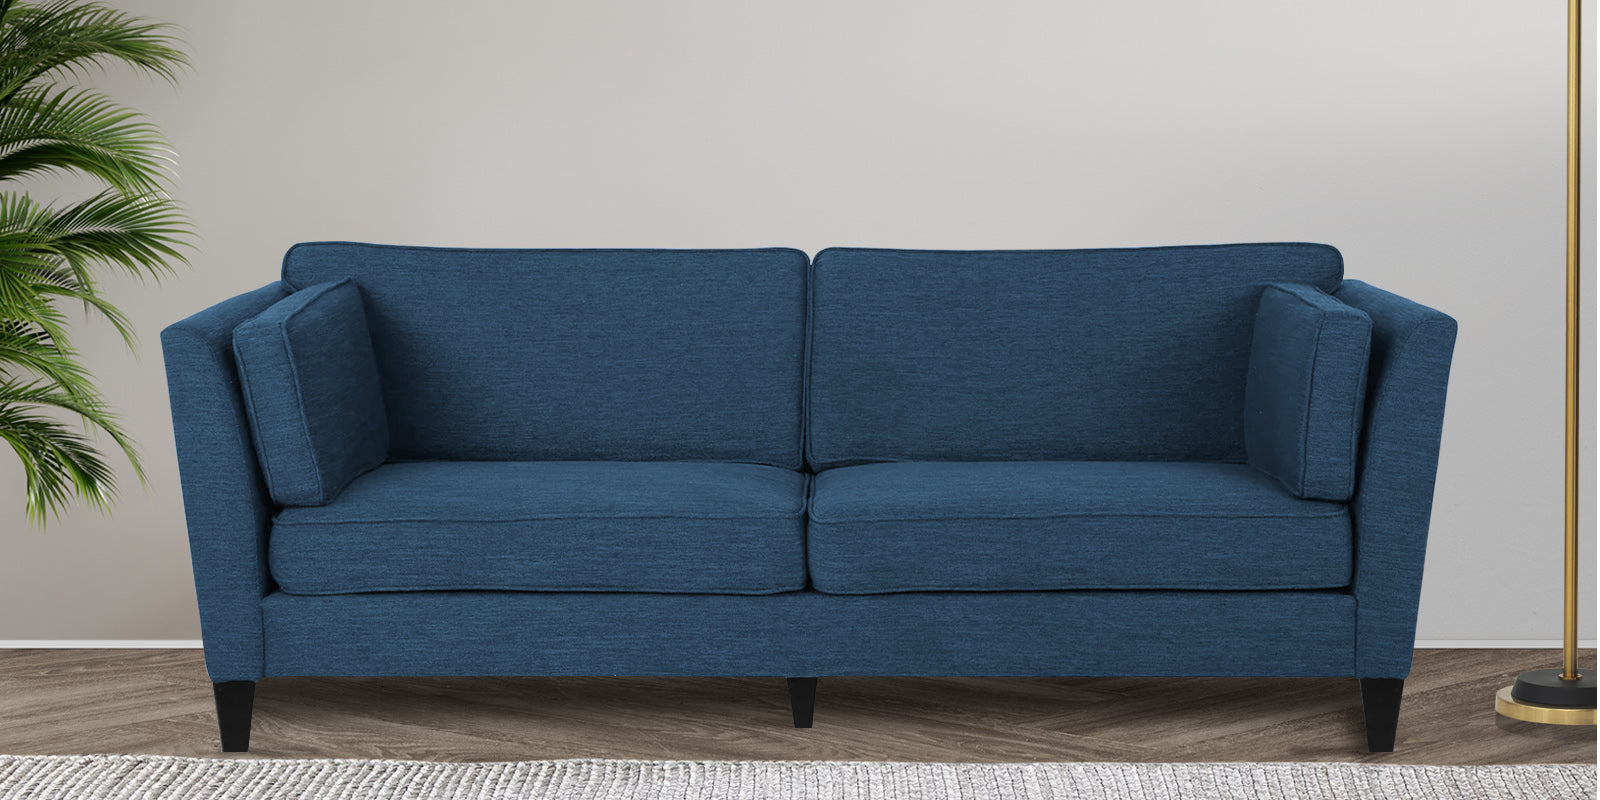 Nigar Fabric 3 Seater Sofa in Light Blue Colour